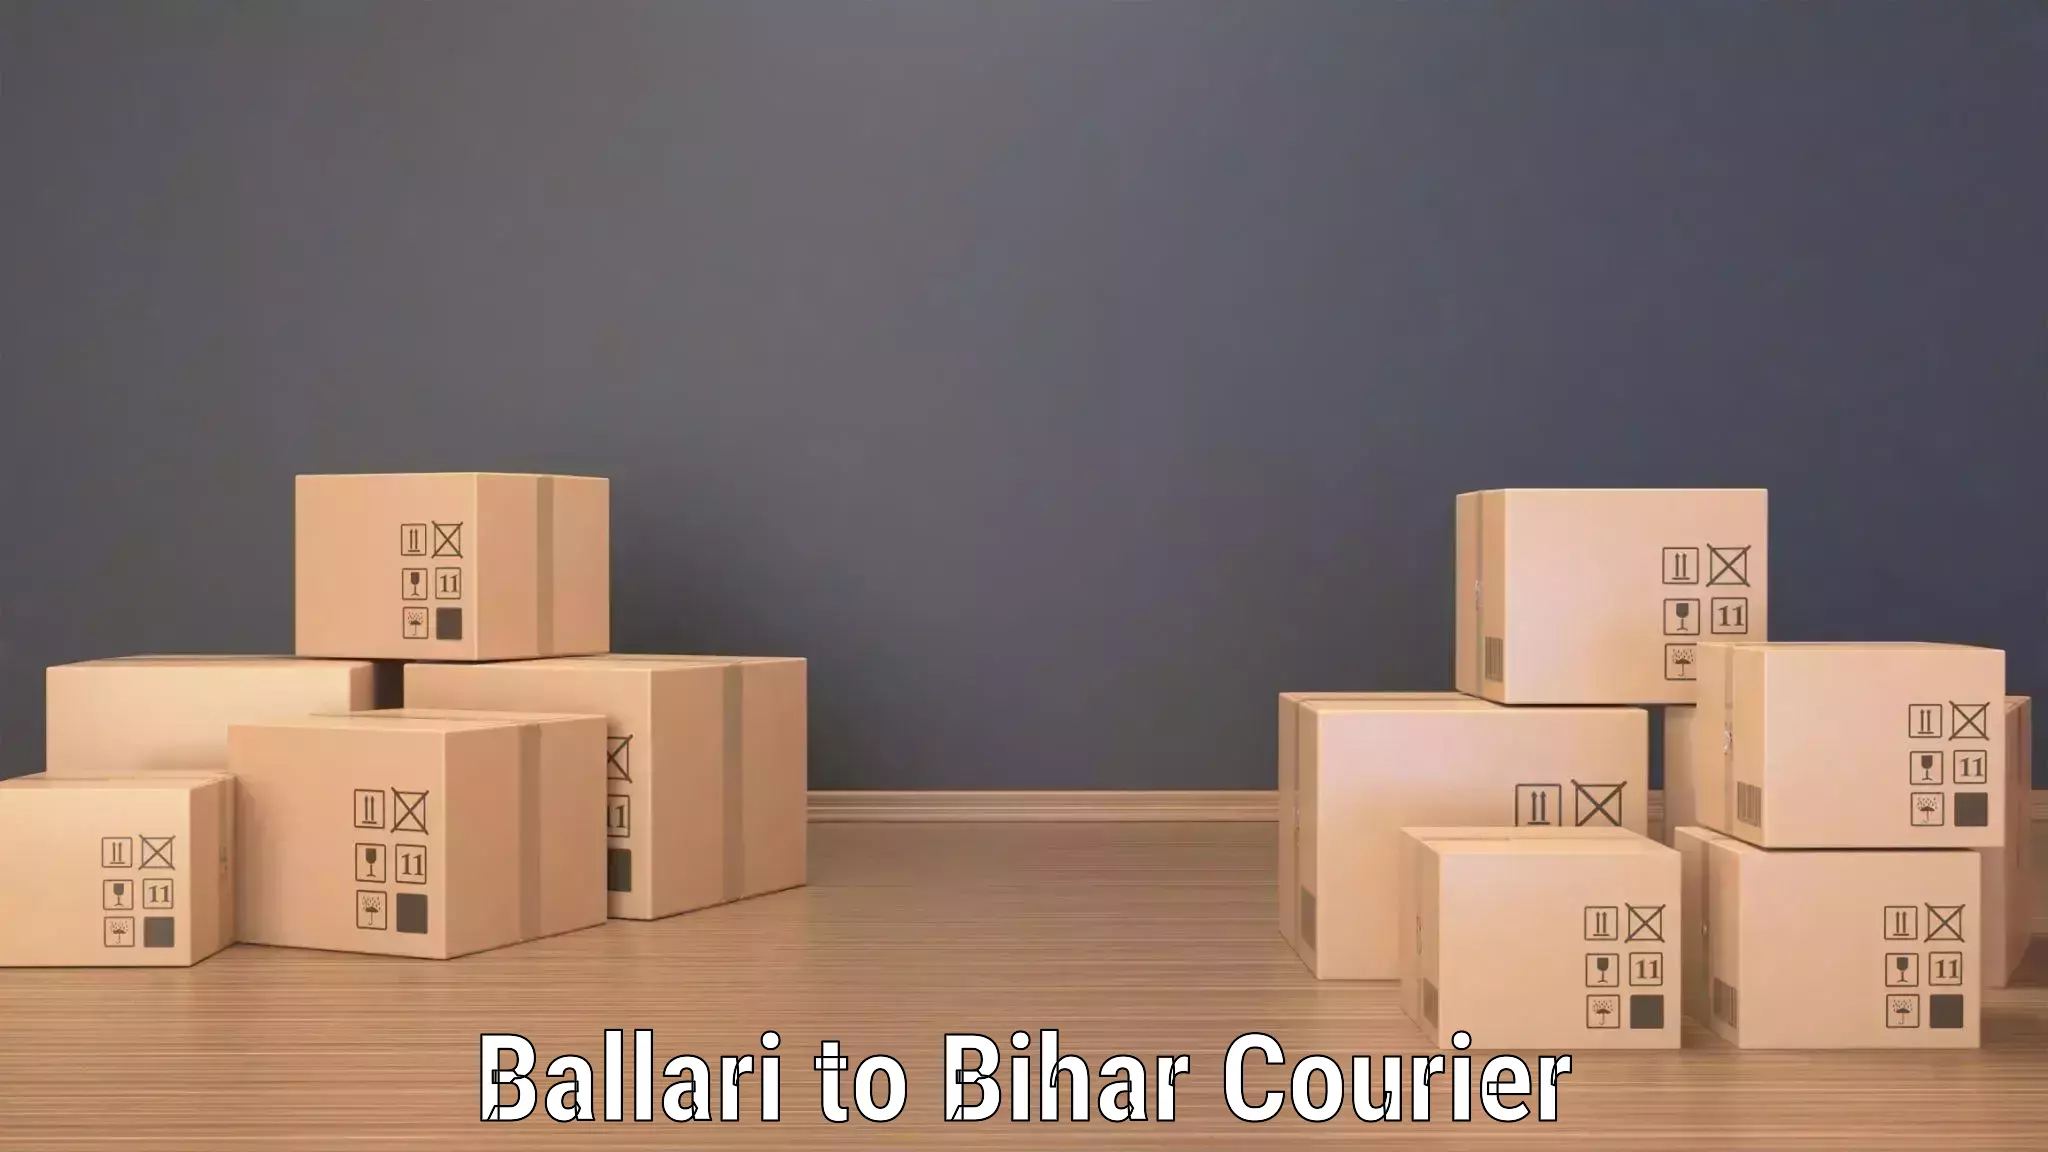 Package delivery network Ballari to Sandesh